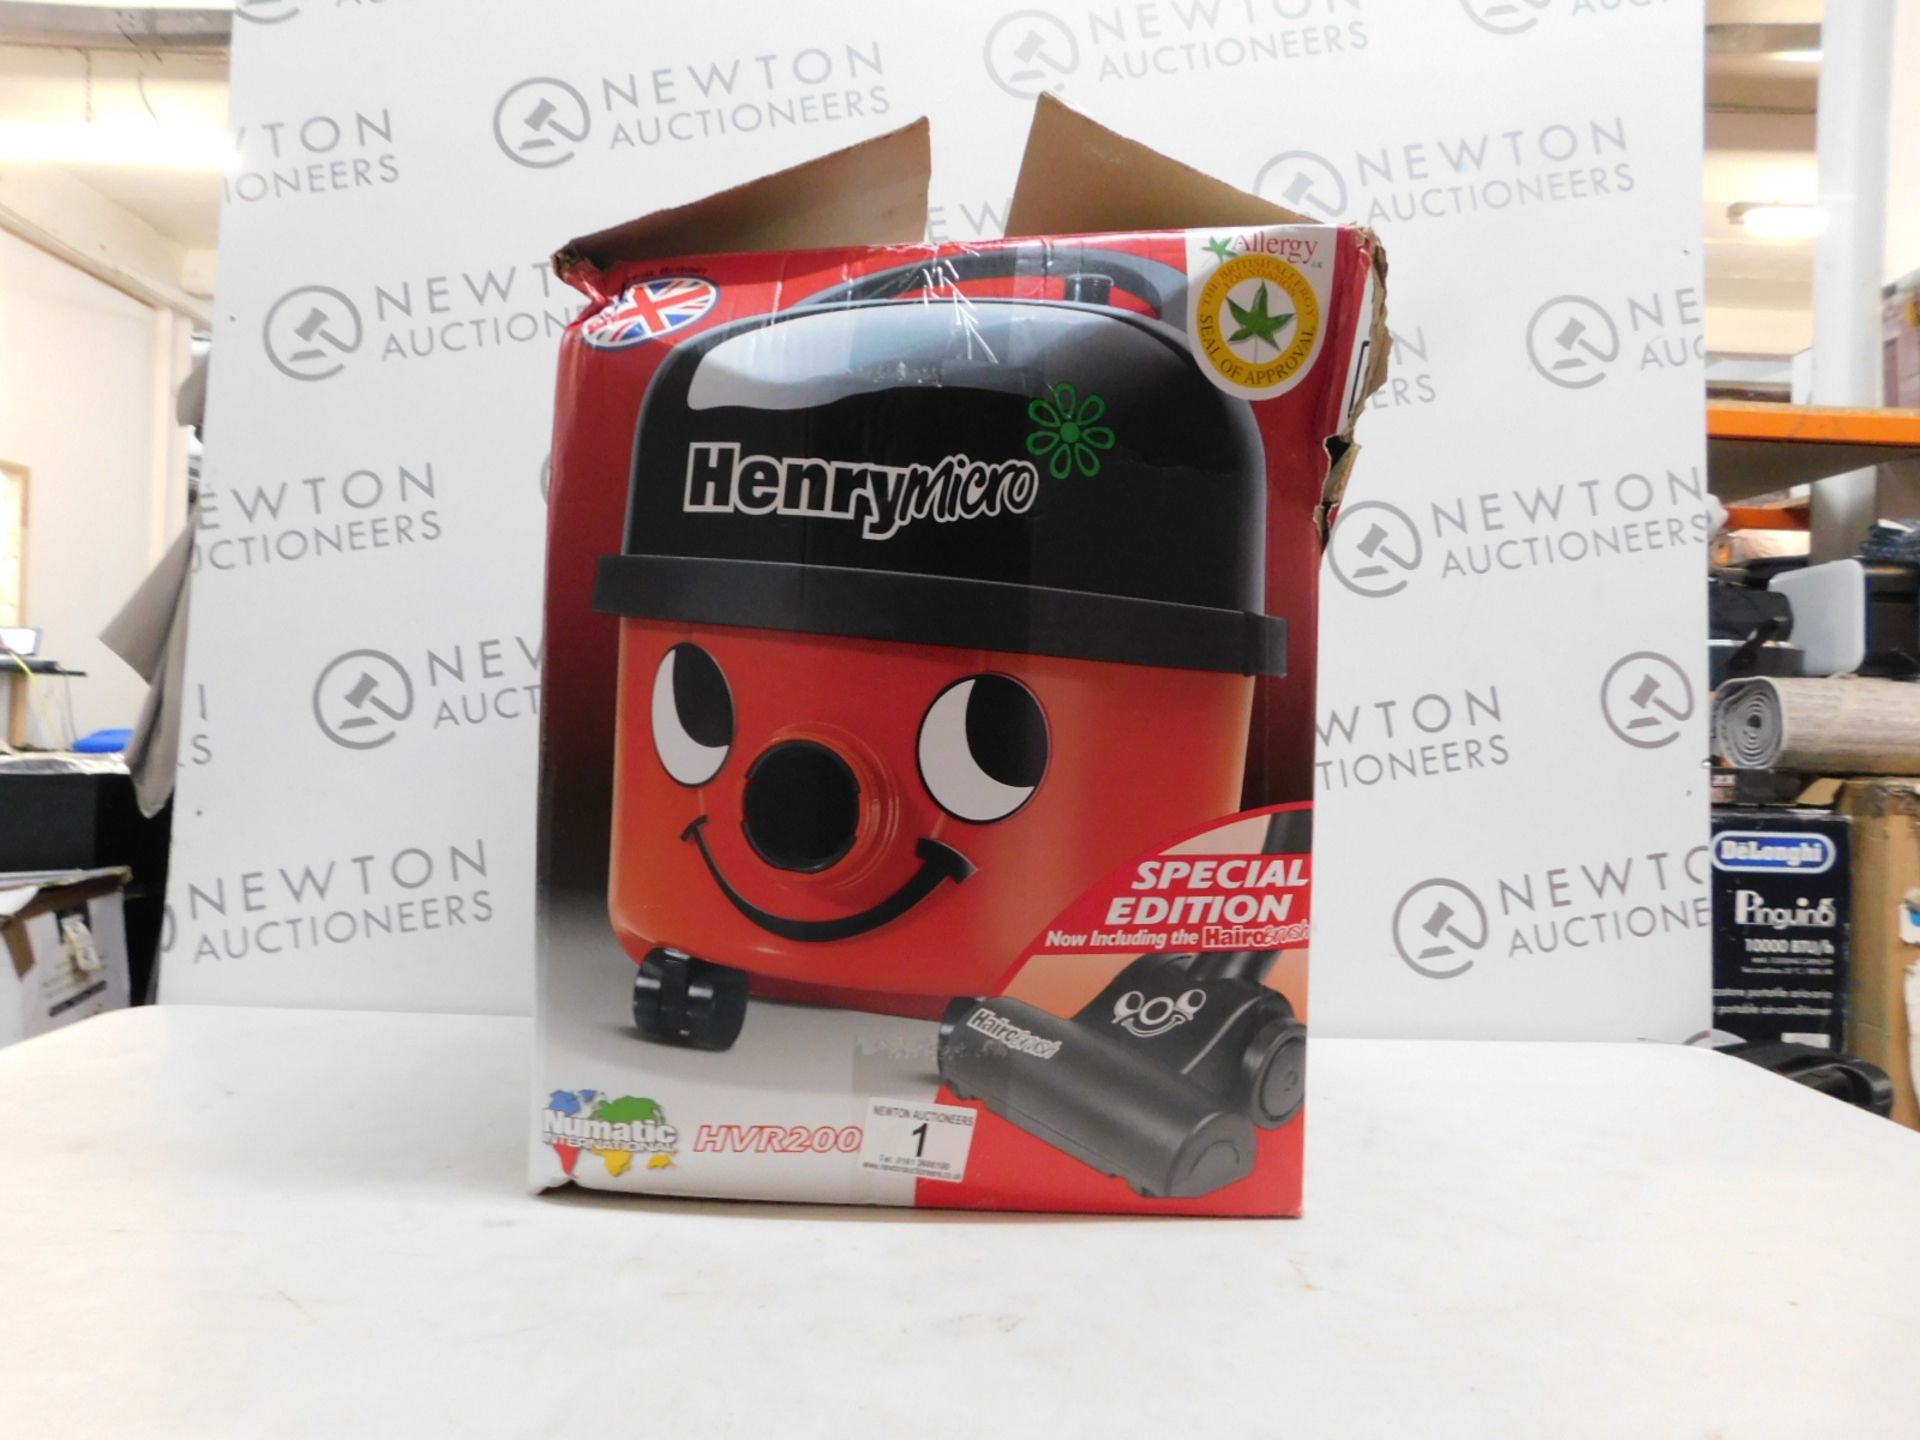 1 BOXED NUMATIC HVR200M HENRY MICRO VACUUM CLEANER WITH ACCESSORIES RRP Â£199.99 (LIKE NEW